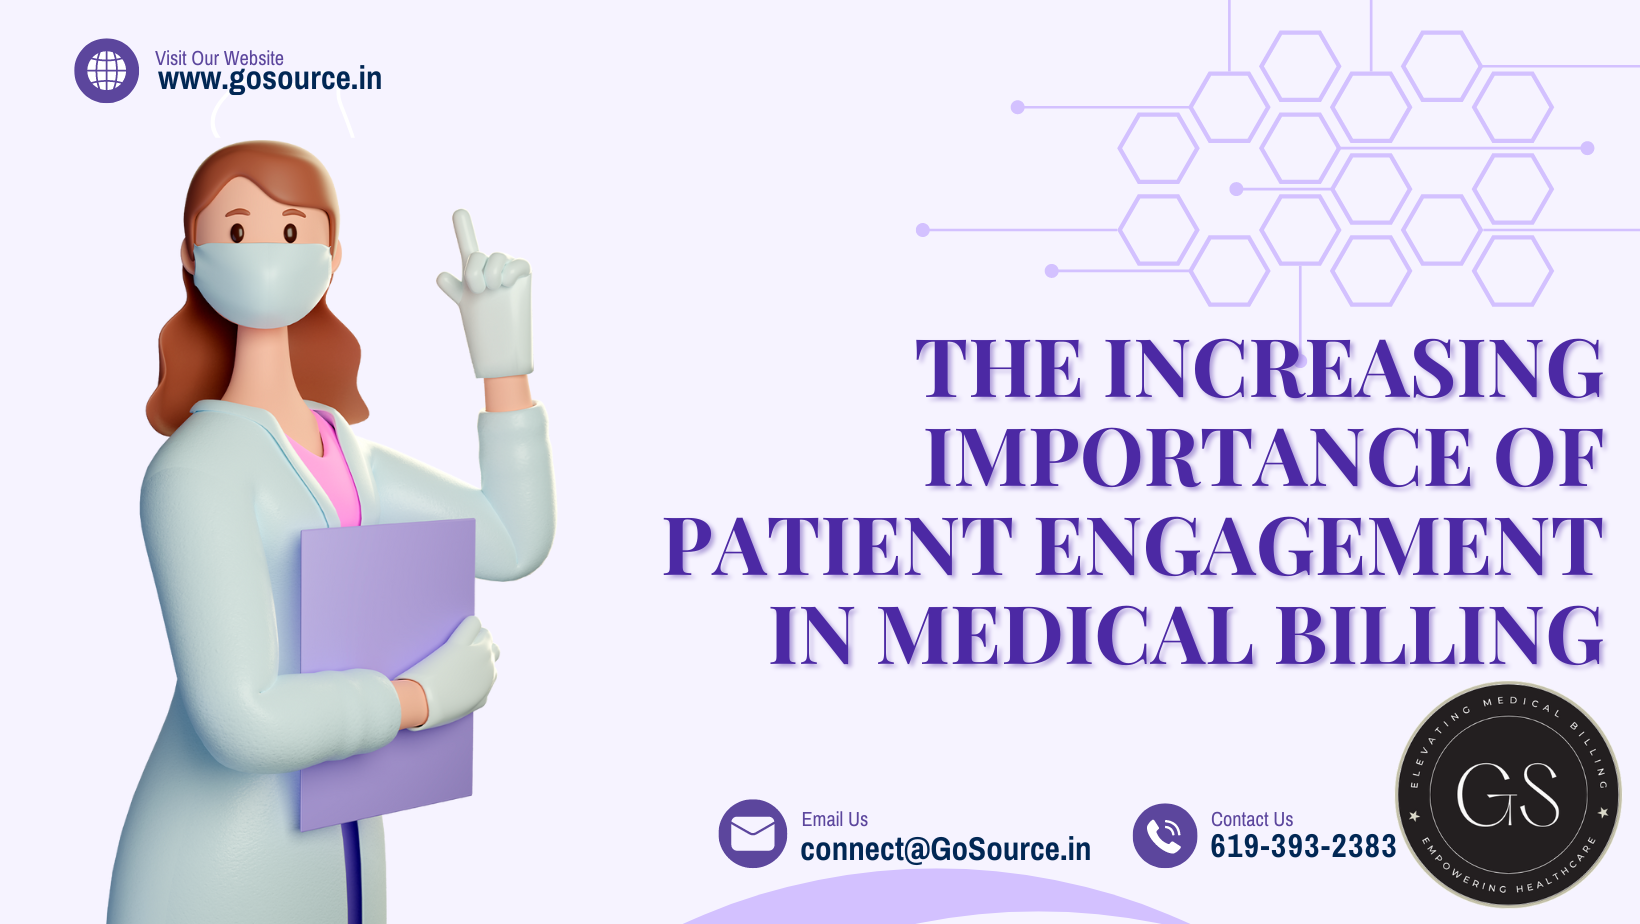 The Increasing Importance of Patient Engagement in Medical Billing